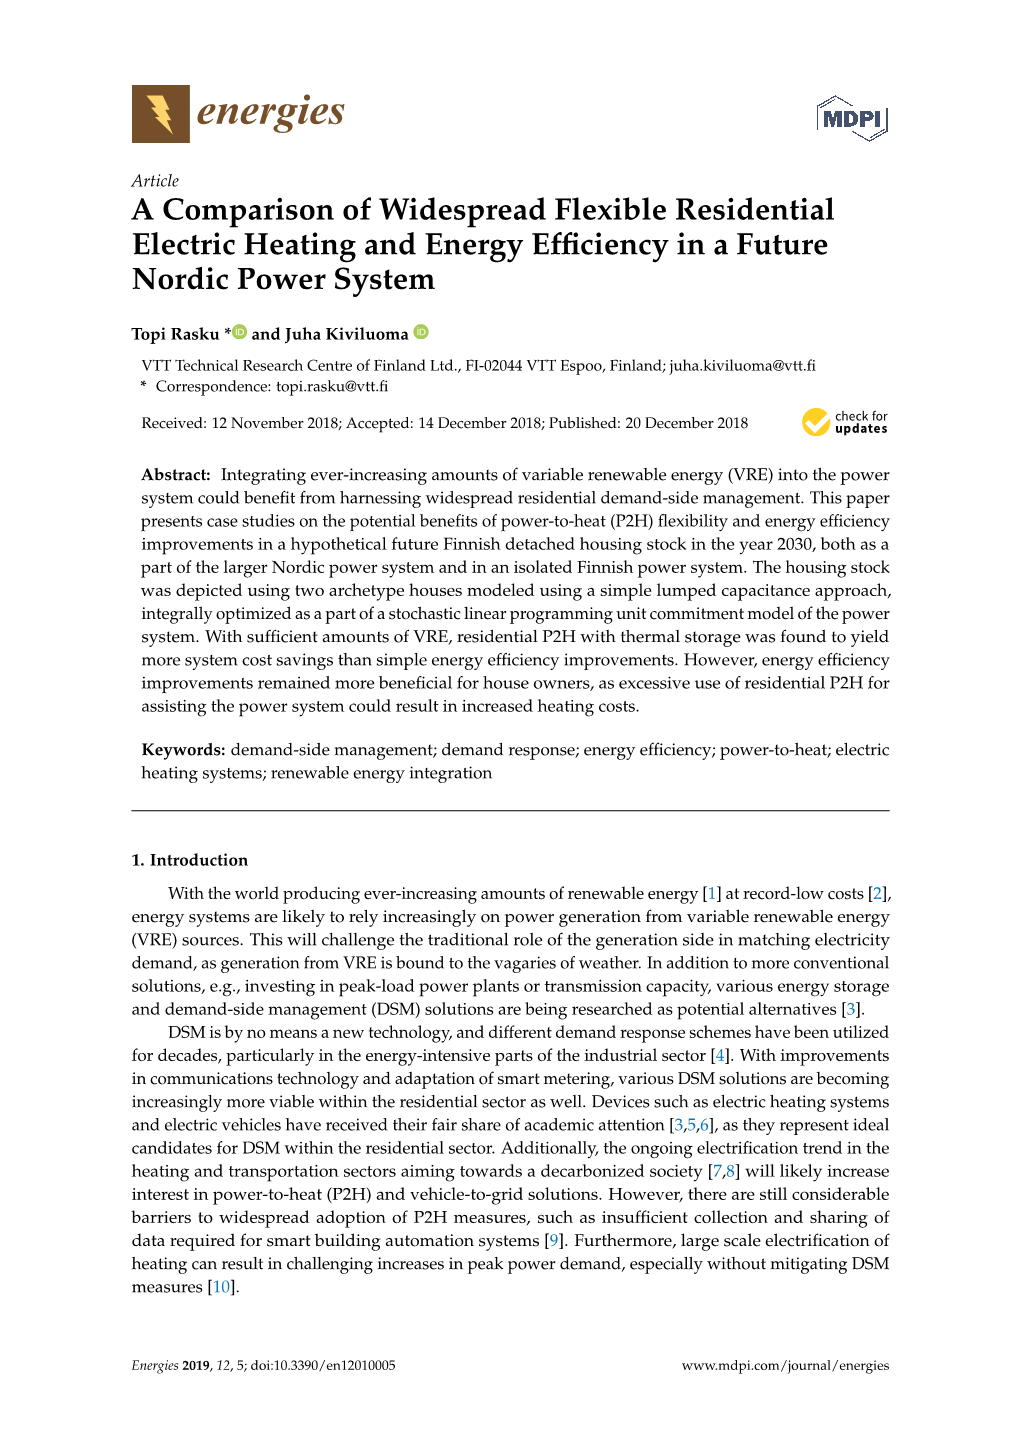 A Comparison of Widespread Flexible Residential Electric Heating and Energy Efﬁciency in a Future Nordic Power System